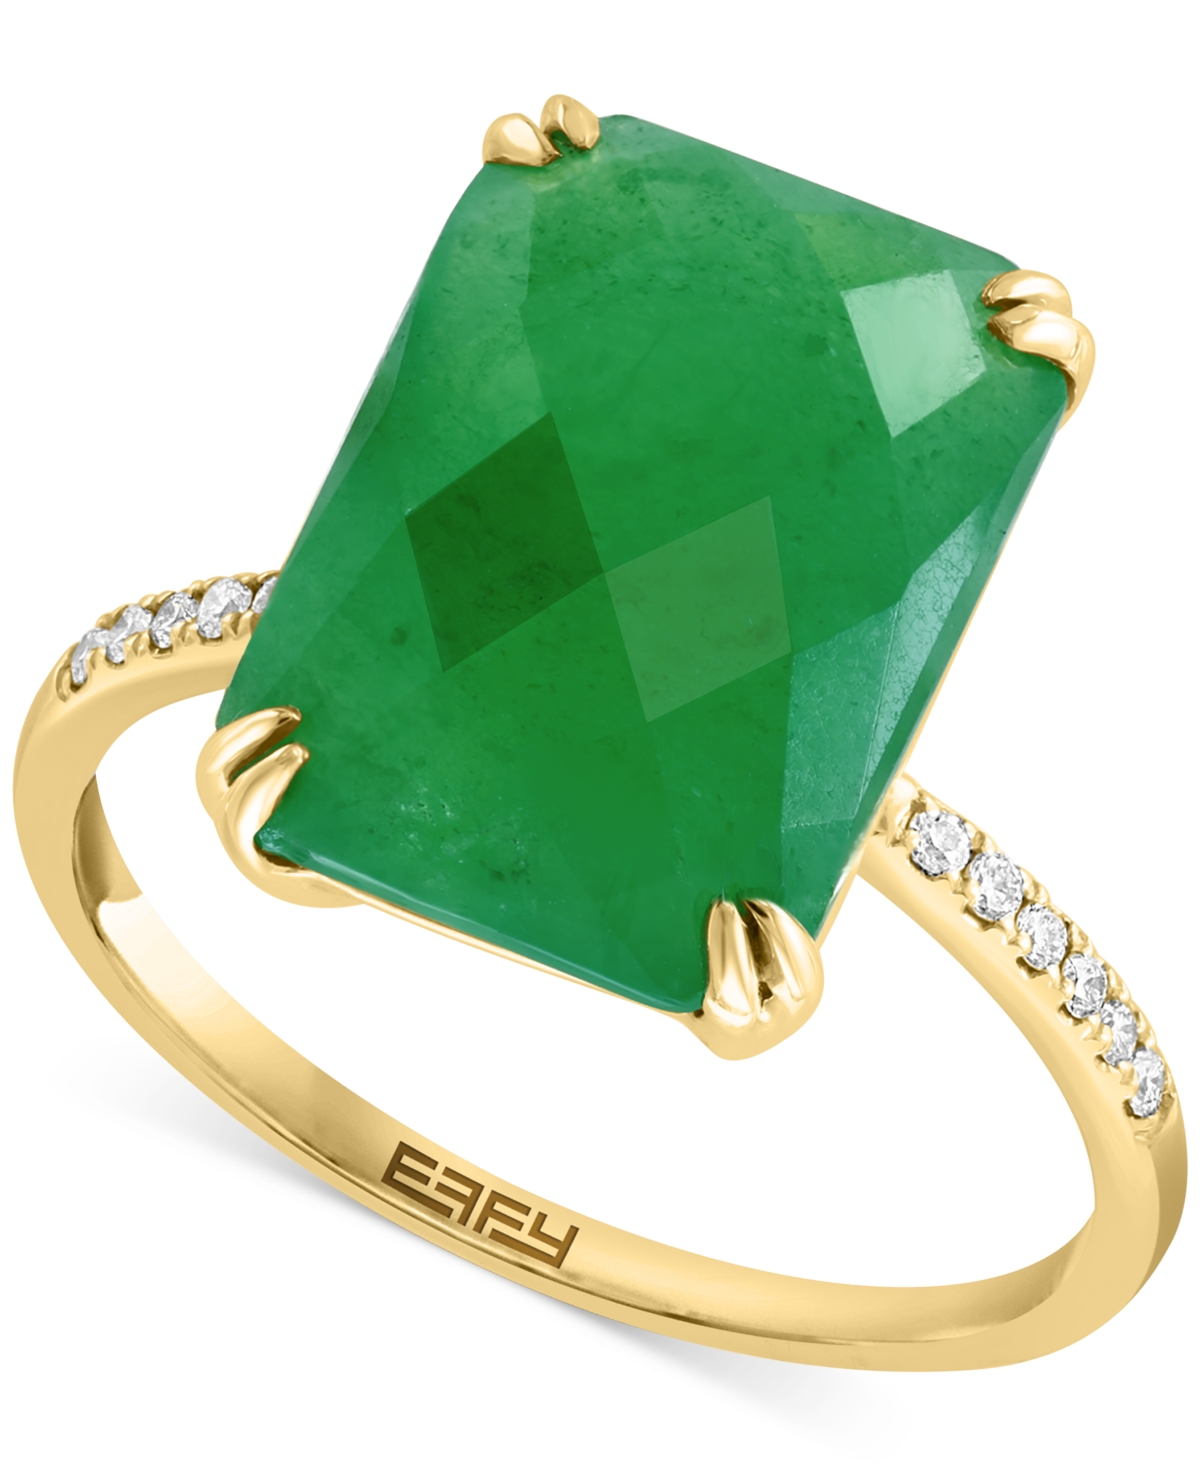 Effy Dyed Jade & Diamond (1/20 ct. t.w.) Statement Ring in 14k Gold - Yellow Gold